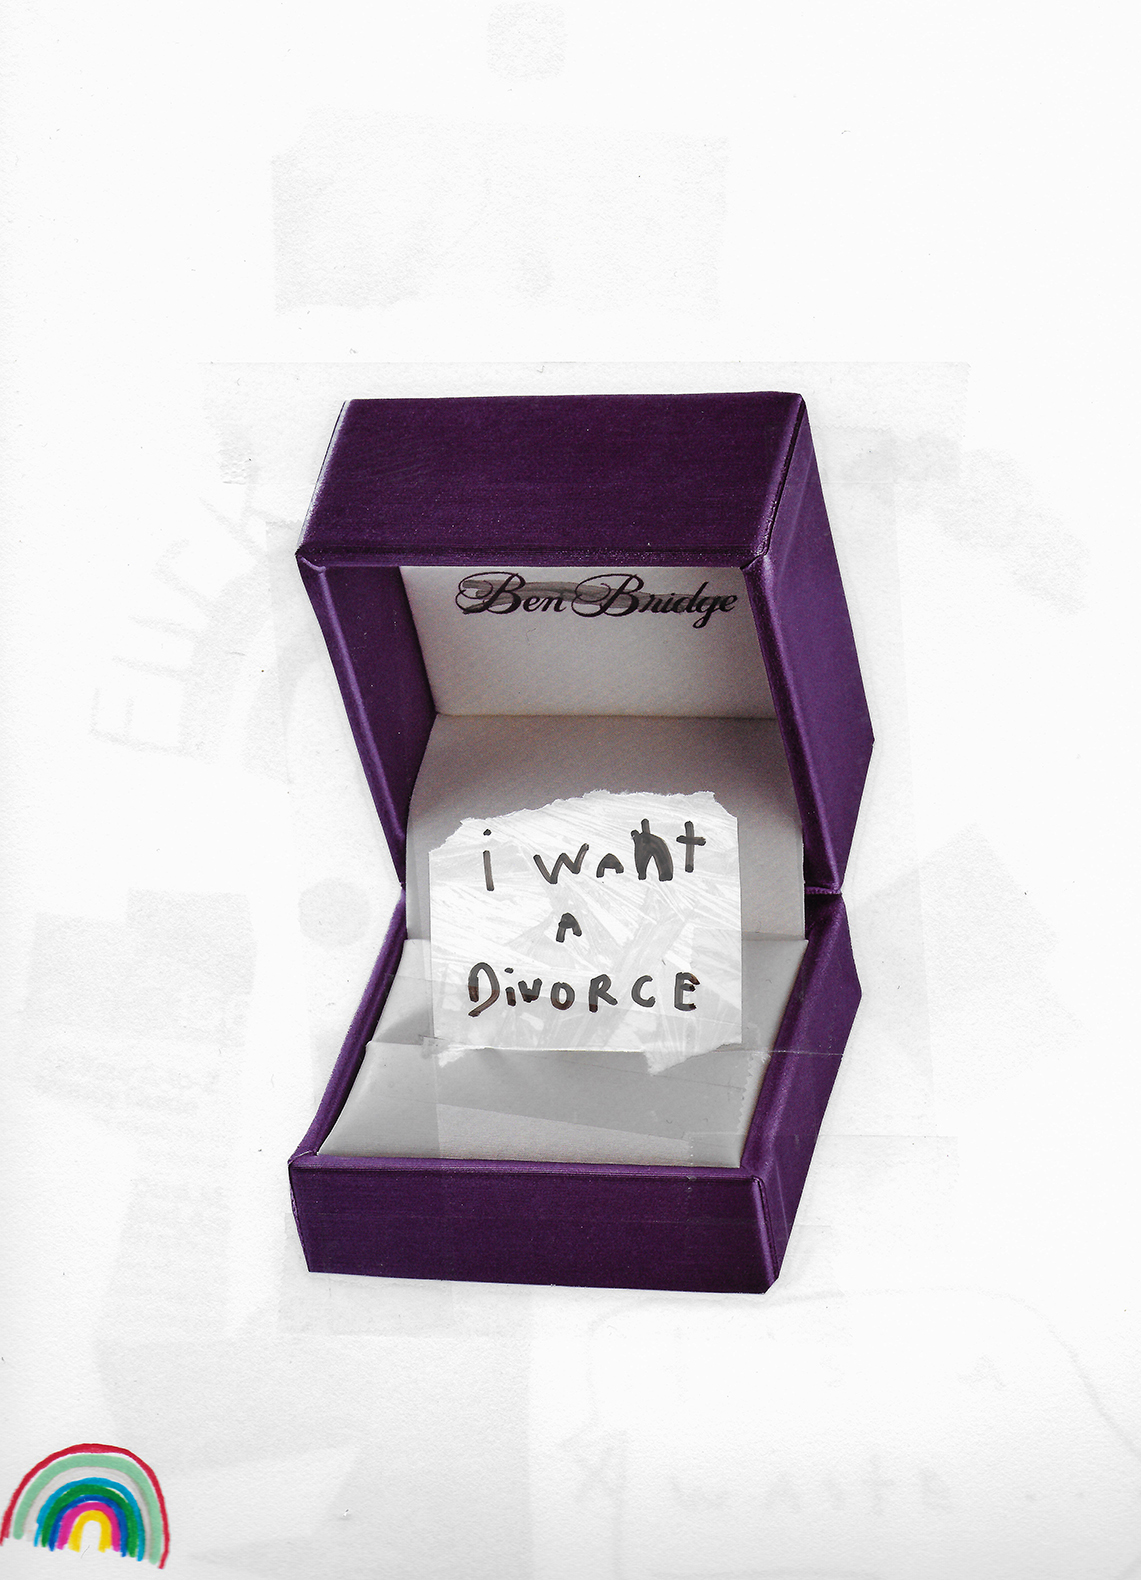 A ring case with a divorce note in it